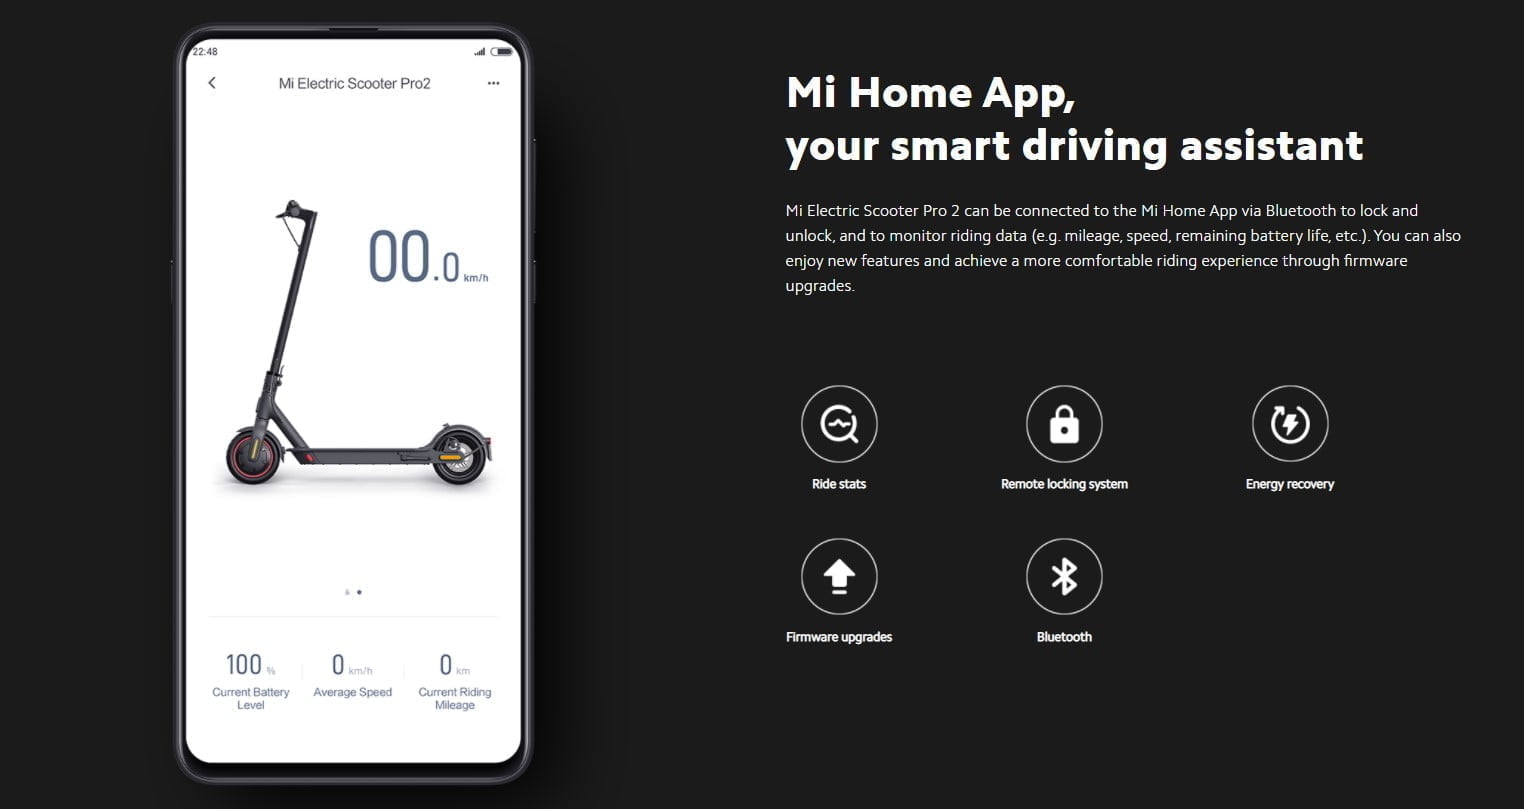 Screenshot 2021 02 27 190631 Xiaomi &Lt;H1&Gt;Mi Electric Scooterpro 2&Lt;/H1&Gt; &Lt;H2&Gt;Ride With Power, Go The Distance&Lt;/H2&Gt; &Lt;P Class=&Quot;Title&Quot;&Gt;Performance Upgrades That Will Take You Further: The Perfect Combination Of Practicality And Beauty, Taking You To Further Places.&Lt;/P&Gt; 600W Powerful Motor Performance Enjoy The Speed &Lt;P Class=&Quot;Title&Quot;&Gt;Three-Speed Modes, Easy Switch: When Commuting To Work, Press S To Go Faster. When Cruising Around The Park, Press D, And In Crowded Areas, You Can Turn On The Pedestrian Mode To Go Slower. Simply Double Press The Power Button To Switch Between Modes And Easily Adjust The Speed To Your Surroundings.&Lt;/P&Gt; High Safety Lithium Battery: 45Km Super Long-Range Battery New Generation Energy Recovery System: Convert Kinetic Energy Into Electrical Energy For Longer Battery Life Central Controls Designed For A Better Riding Experience Easy To Control, Try And You Will Know &Lt;P Class=&Quot;Title&Quot;&Gt;Fold It Up In 3 Seconds&Lt;/P&Gt; Fifth-Generation Bms Smart Battery Management System